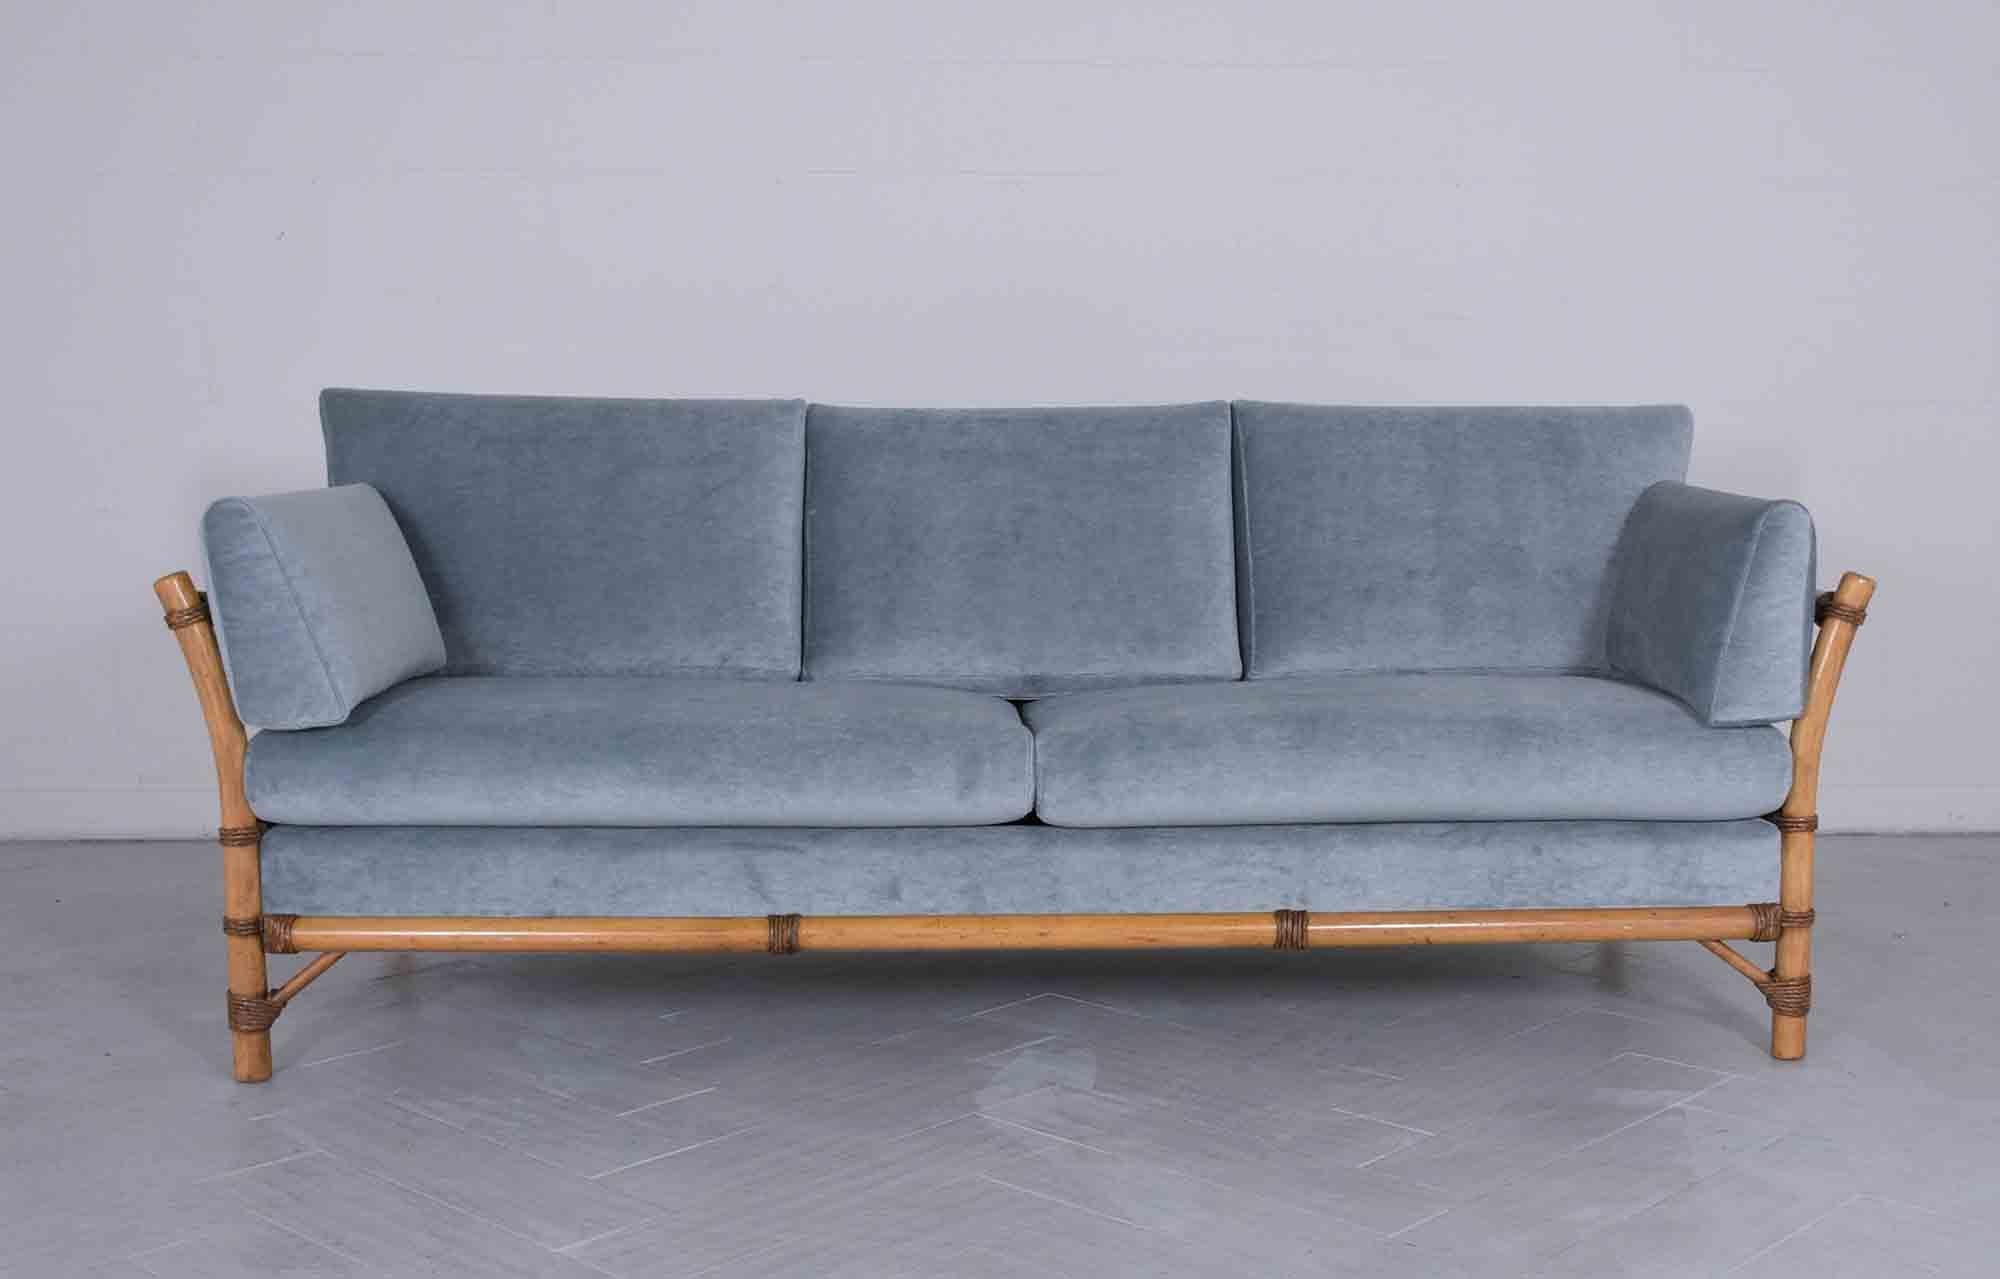 An extraordinary 1970s Mid-Century Modern sofa handcrafted out of wood with a faux bamboo design in great condition and is completely restored by our in-house professional craftsmen team. This vintage settee is eye-catching and features a light